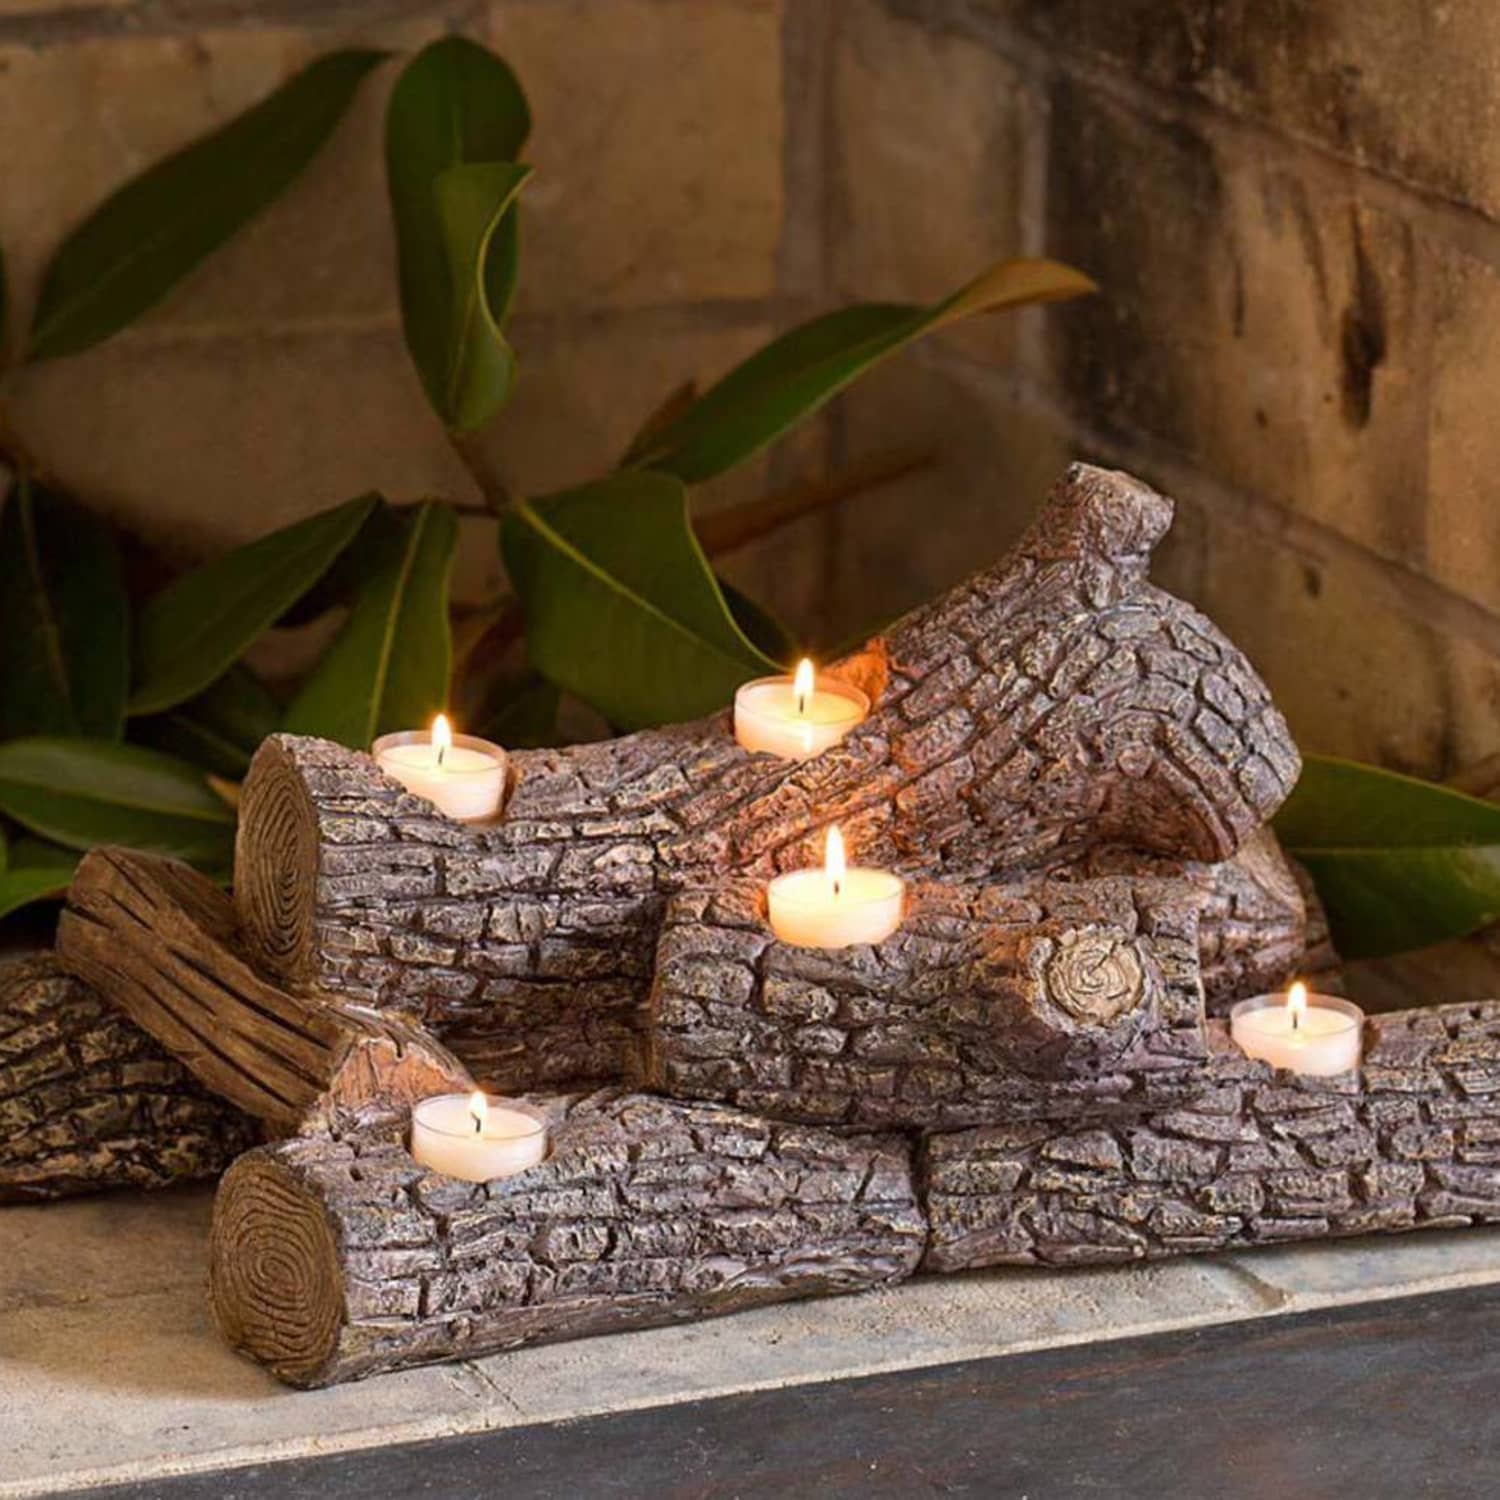 Fire Place Candle Log Rustic Resin Tea Light Holder Faux Fireplace Decor New 